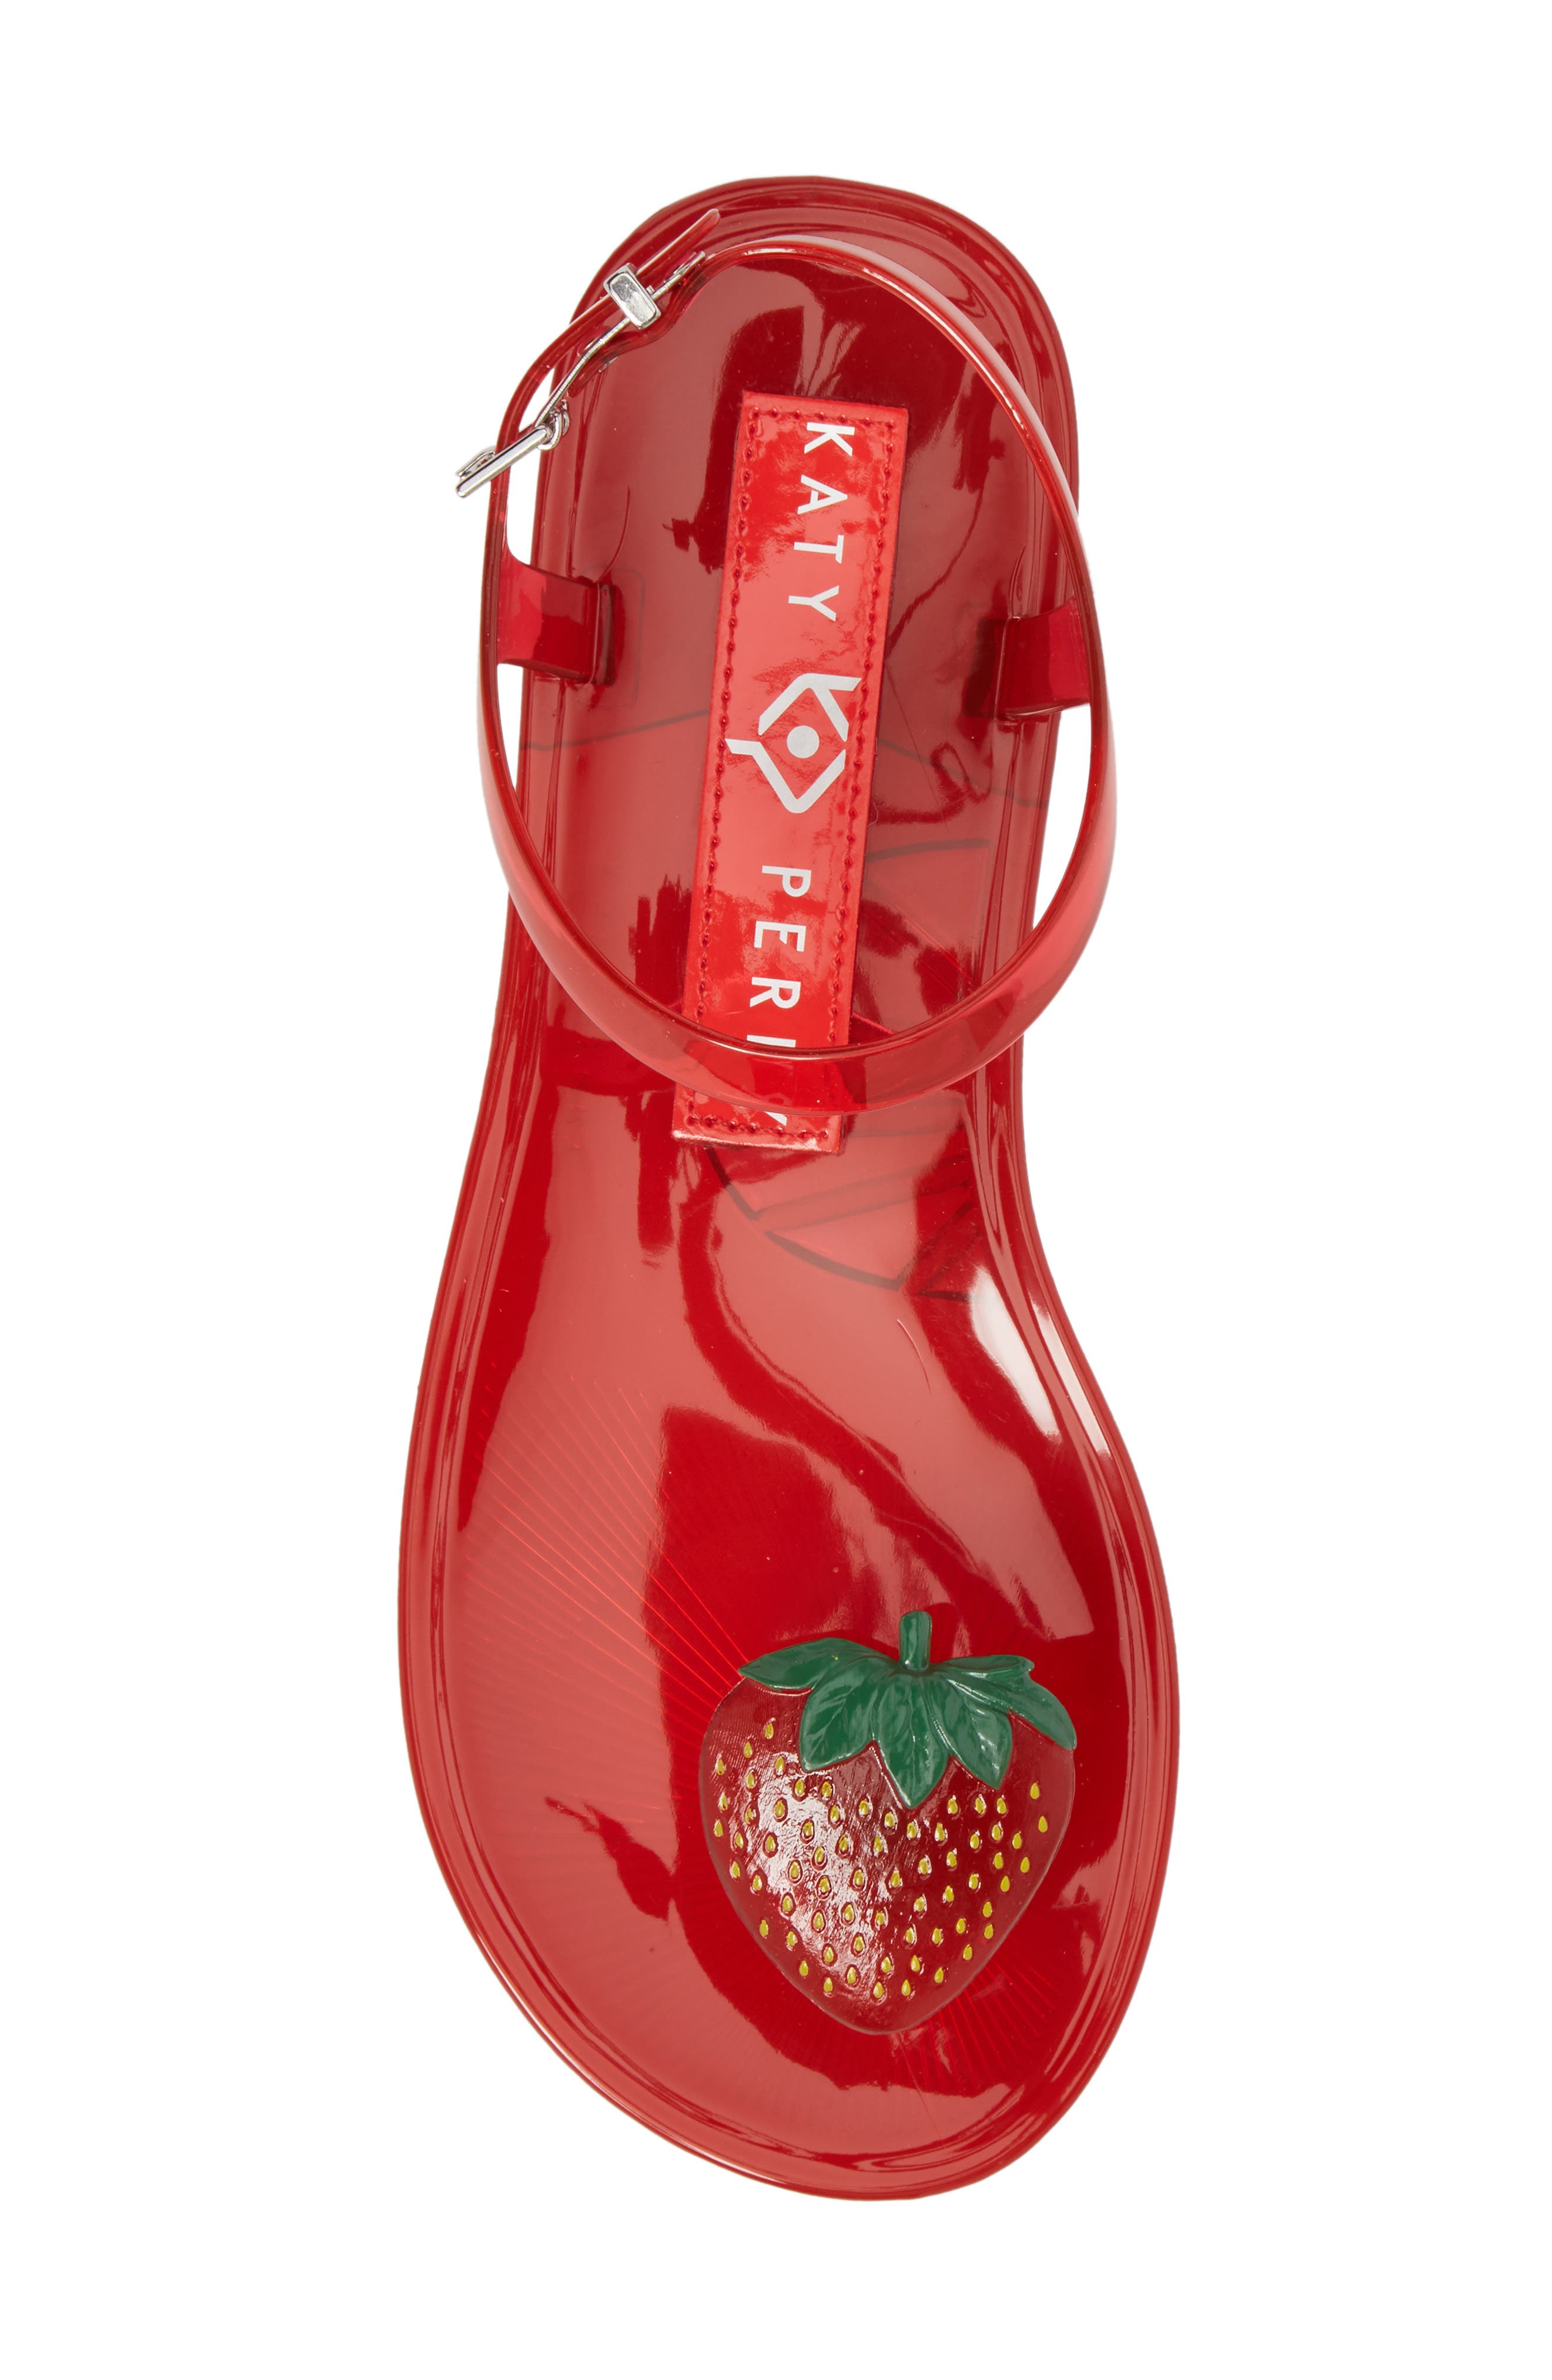 katy perry fruit jelly sandals